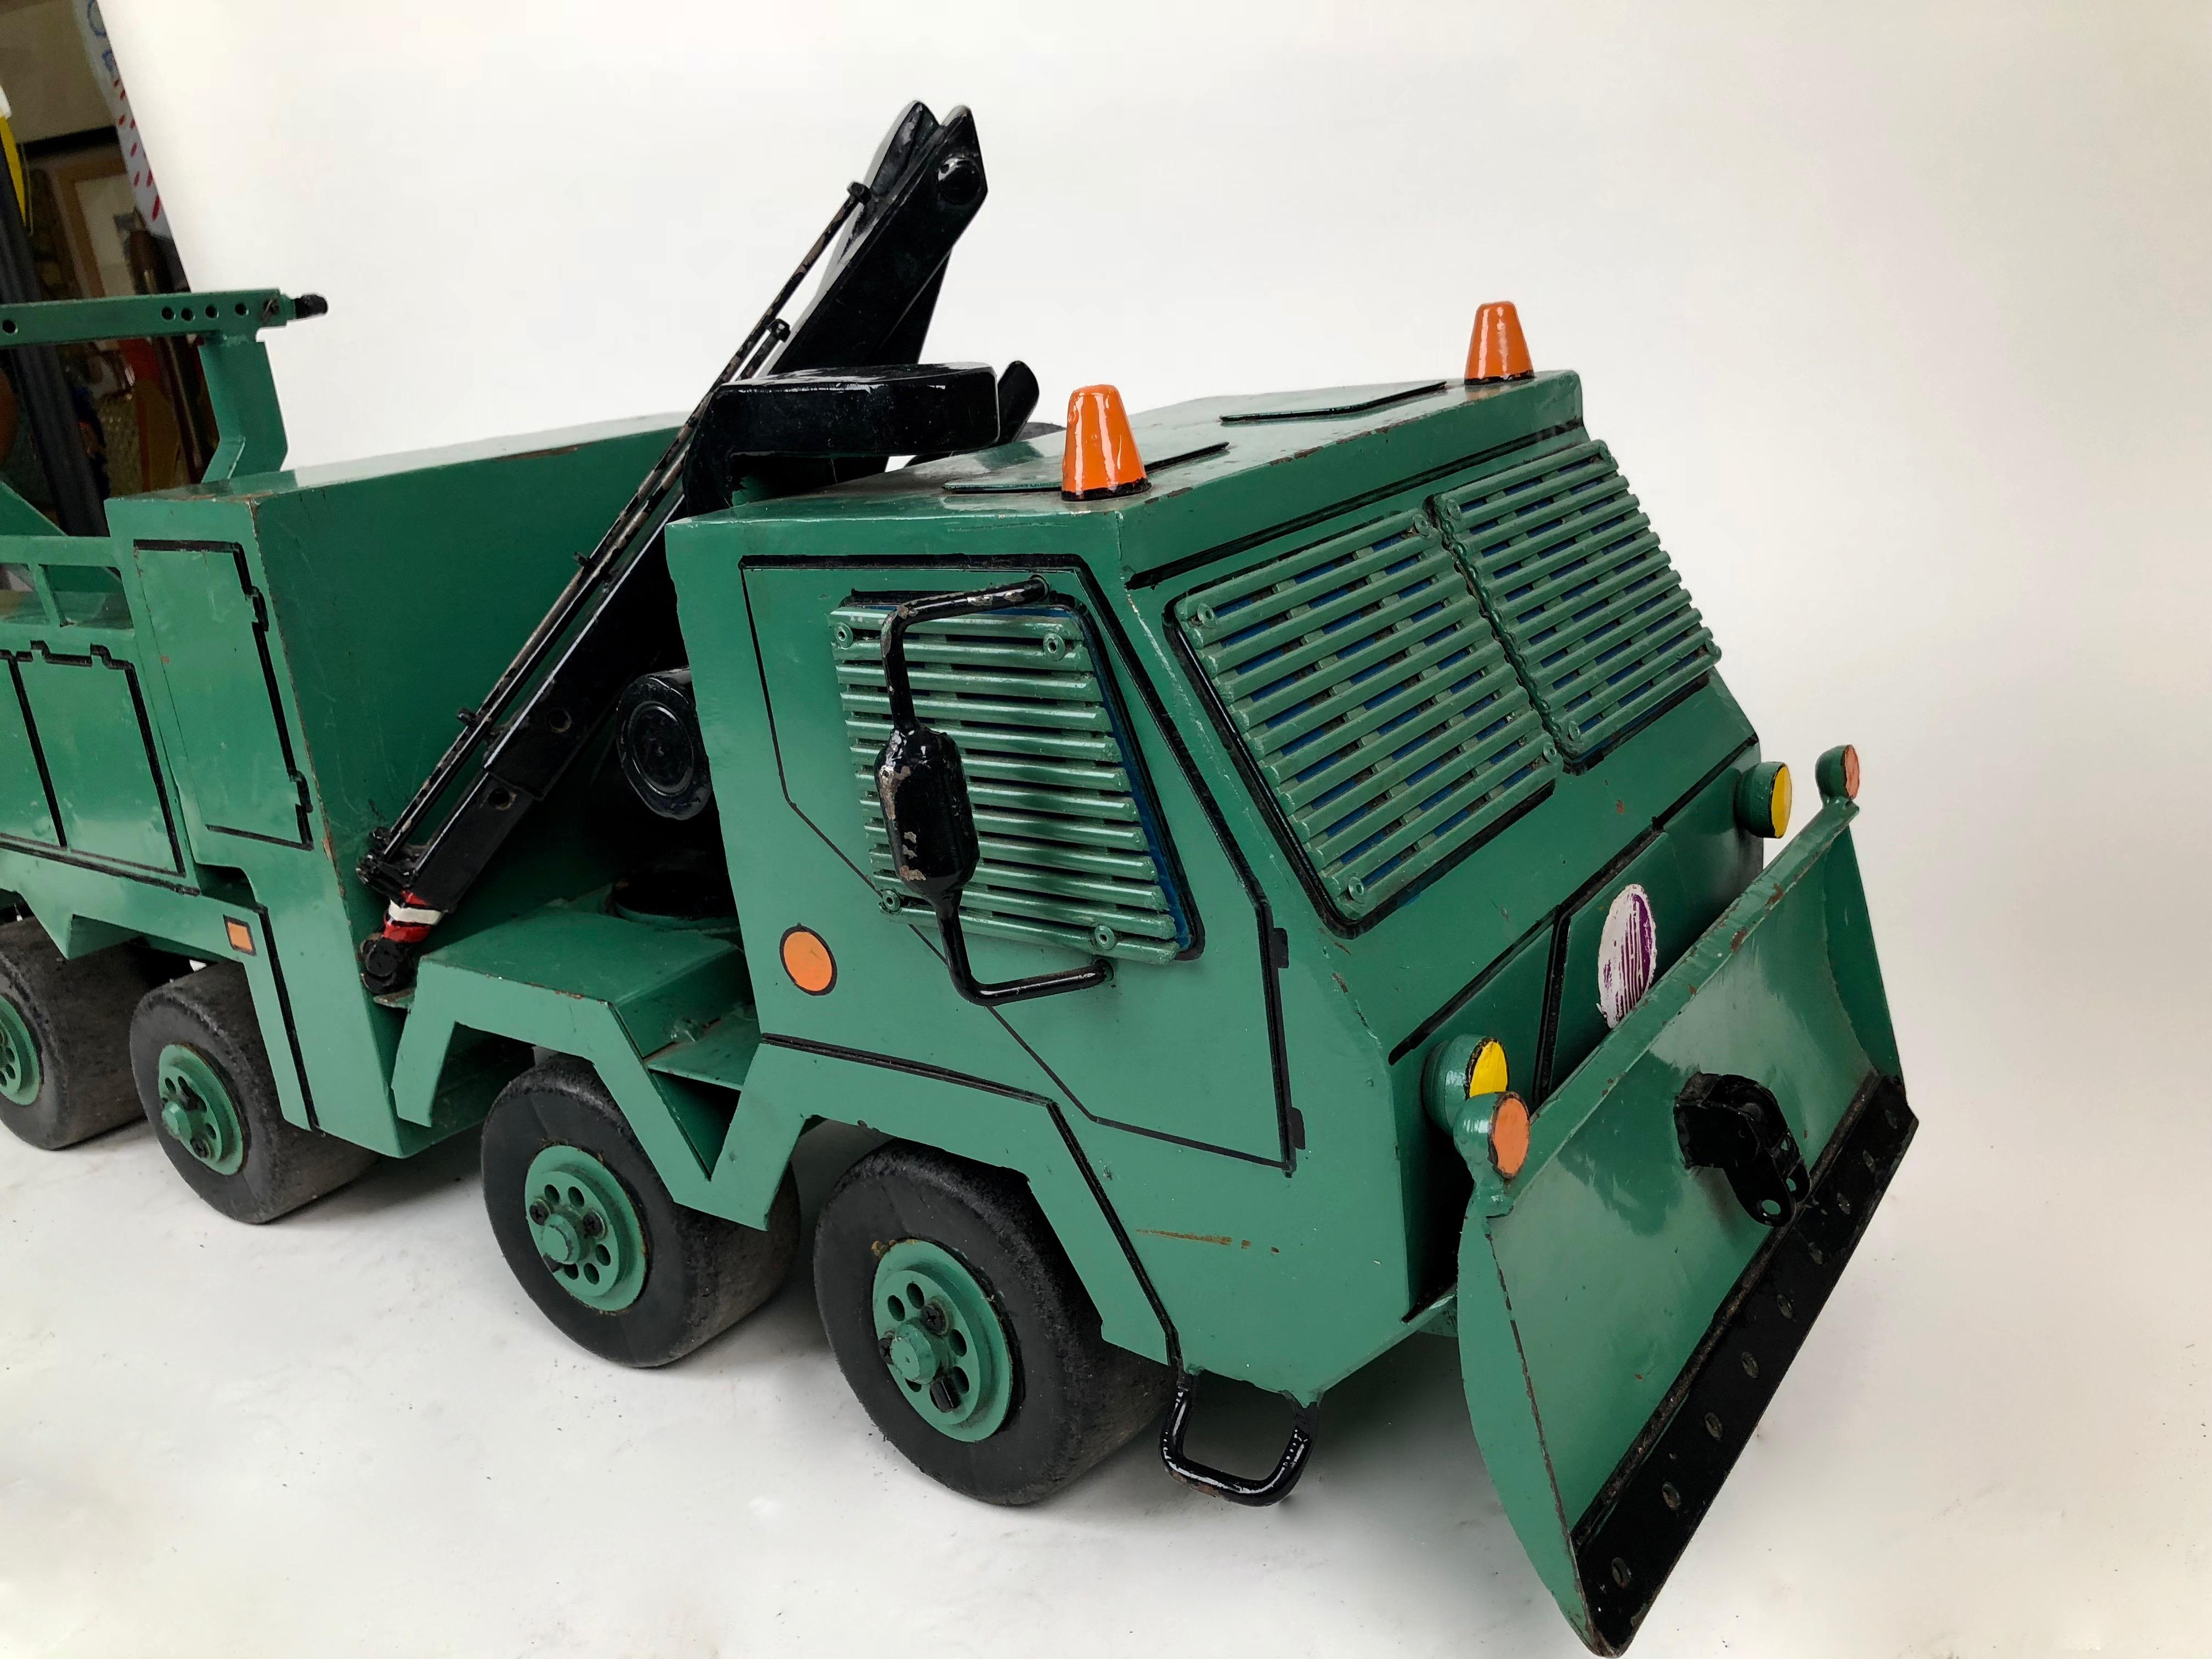 Modern Tatra Grad Military Truck Model from 1980s For Sale